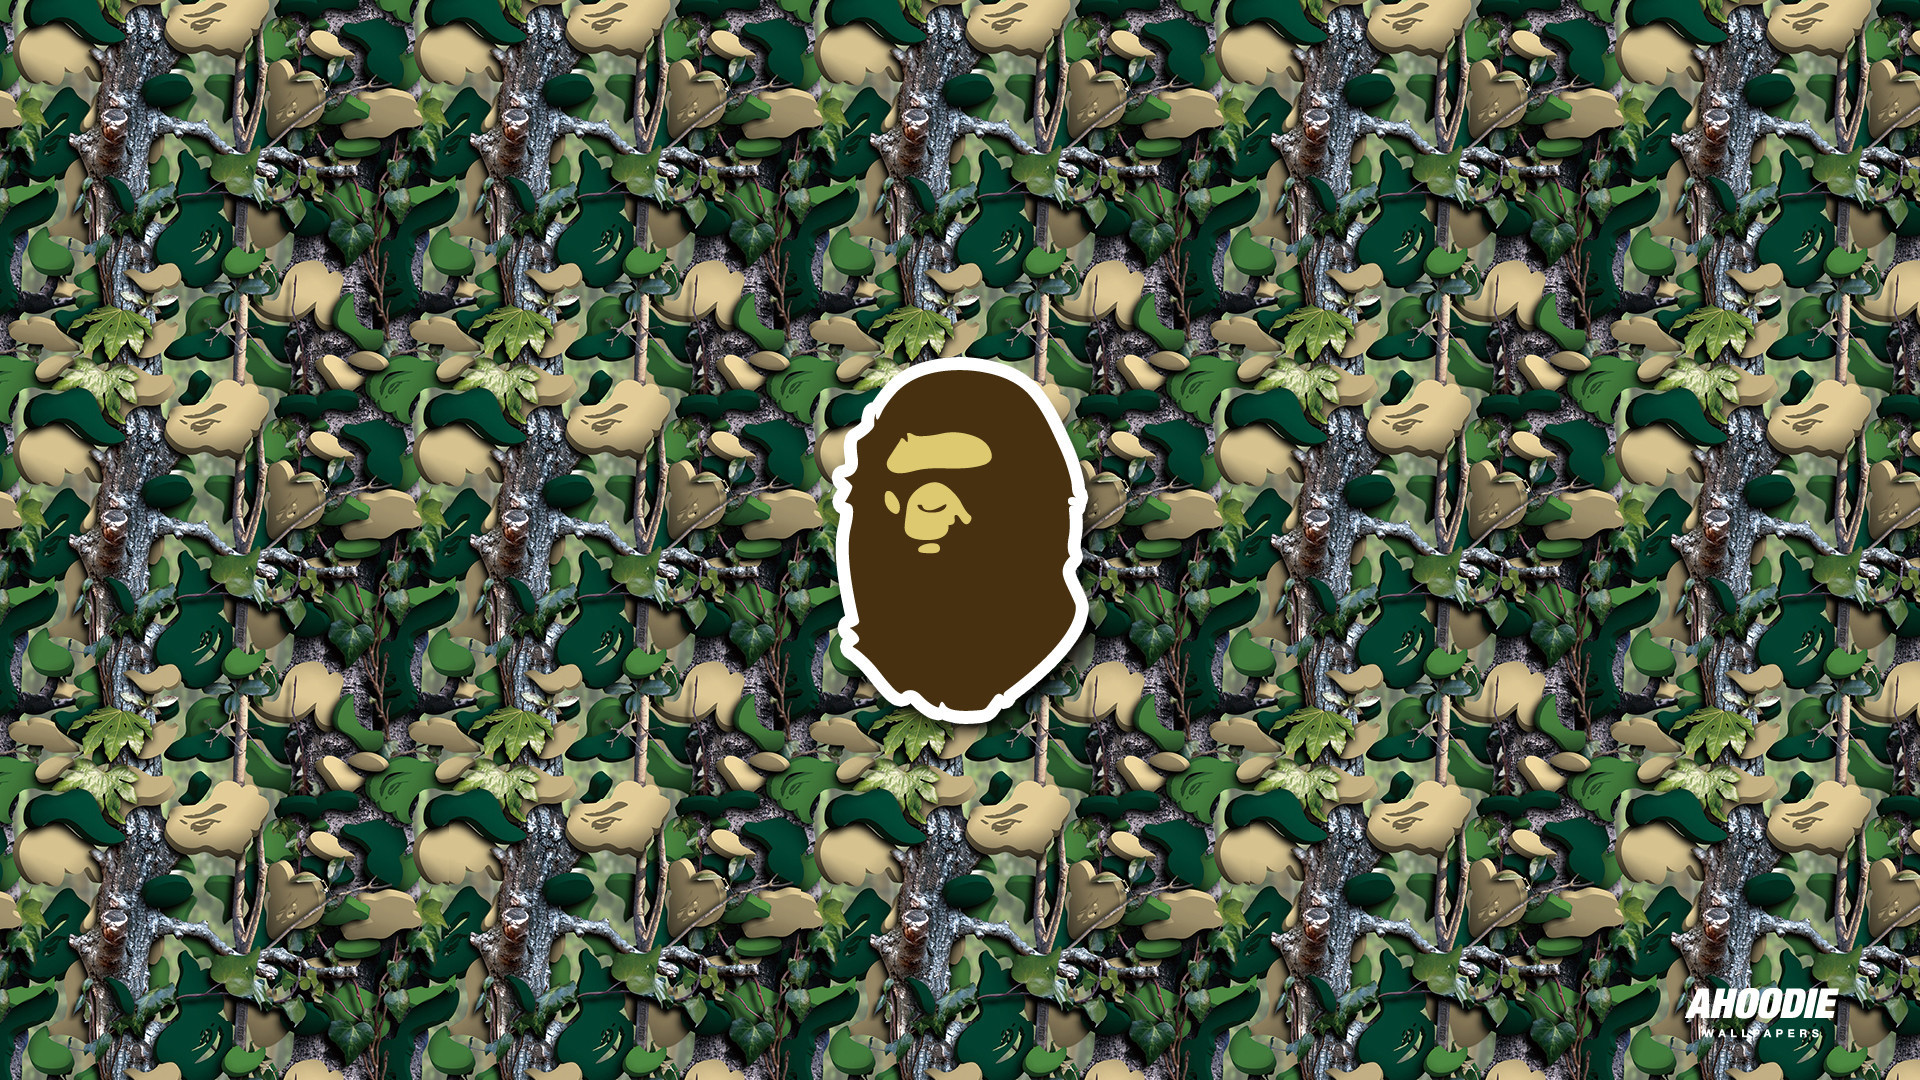 1920x1080  Full Image for Wondrous Camouflage Wallpaper For Walls 127 Hunting  Camo Wallpaper For Walls Camo Wallpaper .